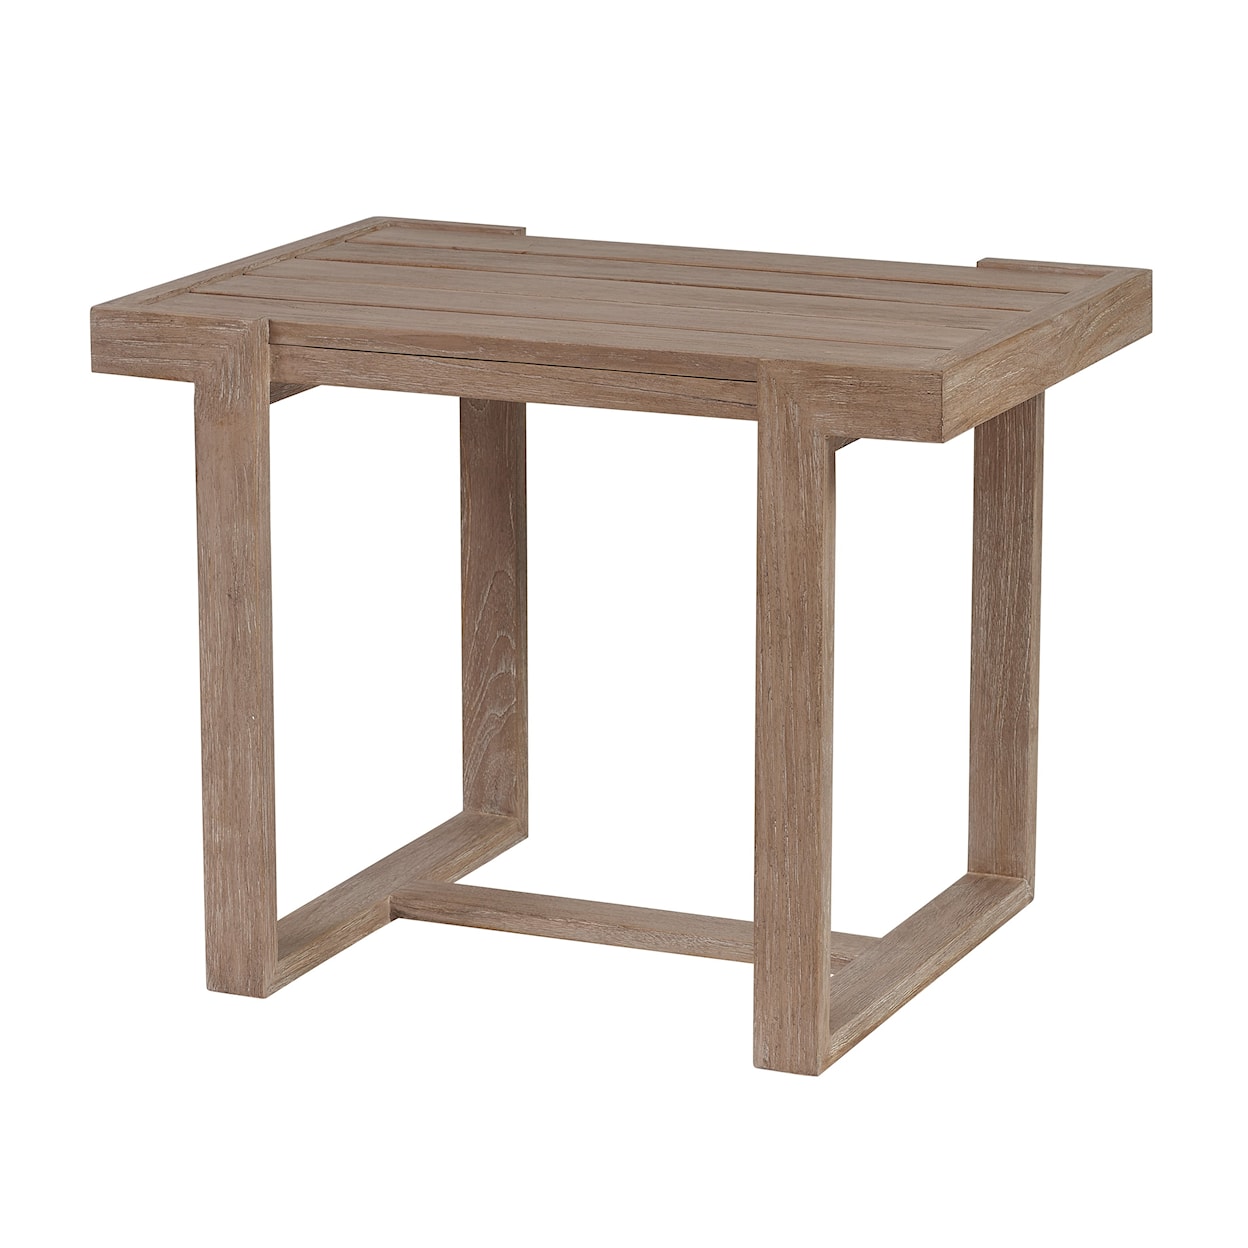 Tommy Bahama Outdoor Living Stillwater Cove Rectangular End Table